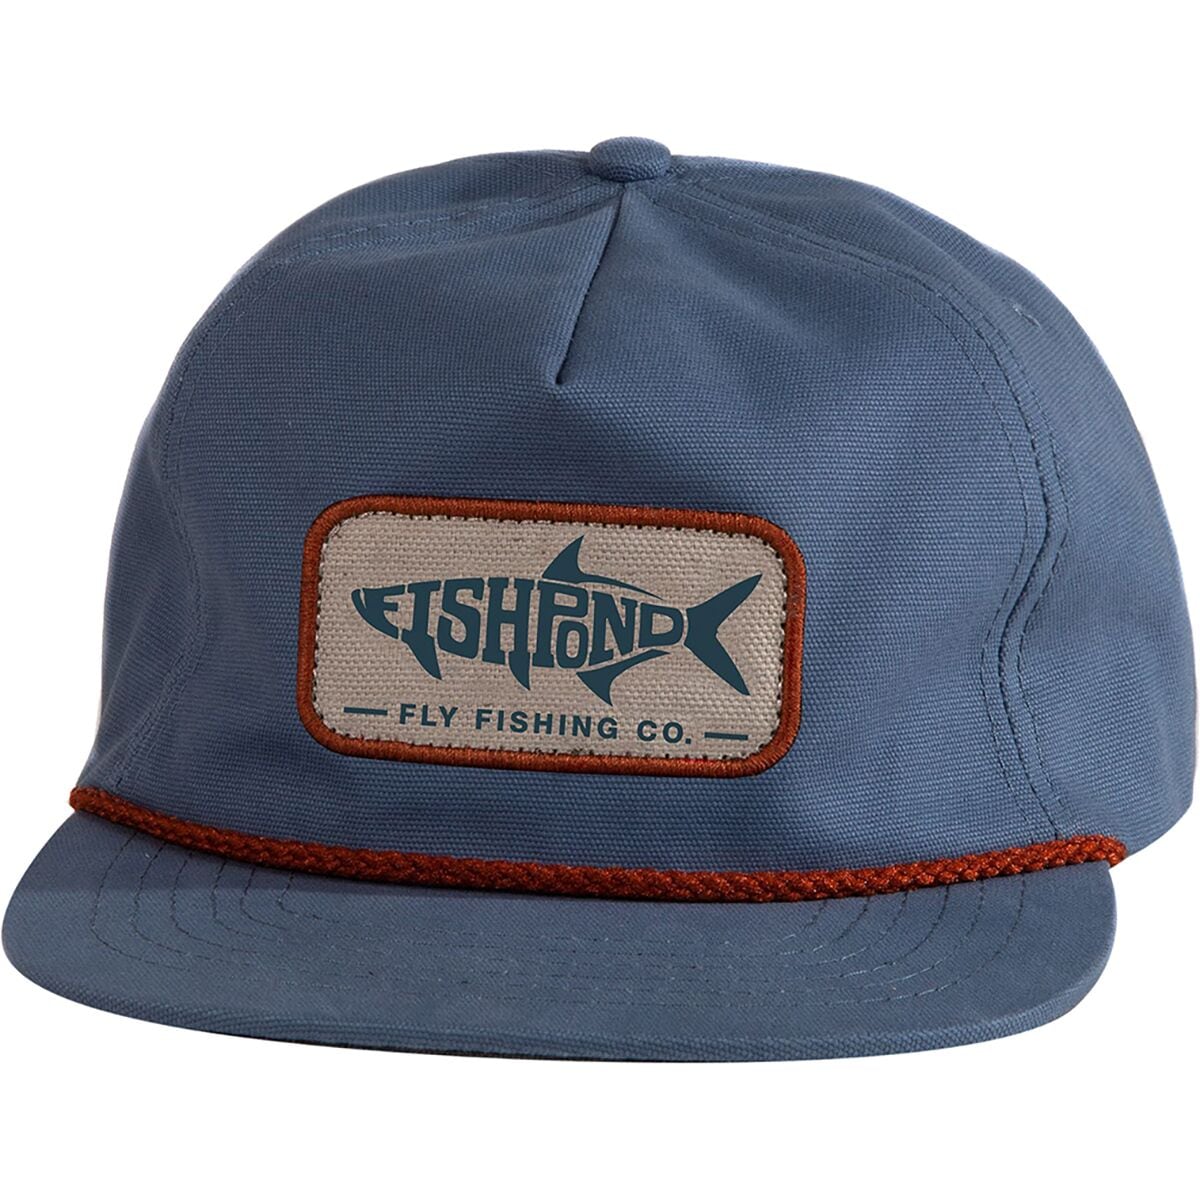 Fishpond Pescado Trucker Hat, Buy Fishpond Fly Fishing Hats Online at